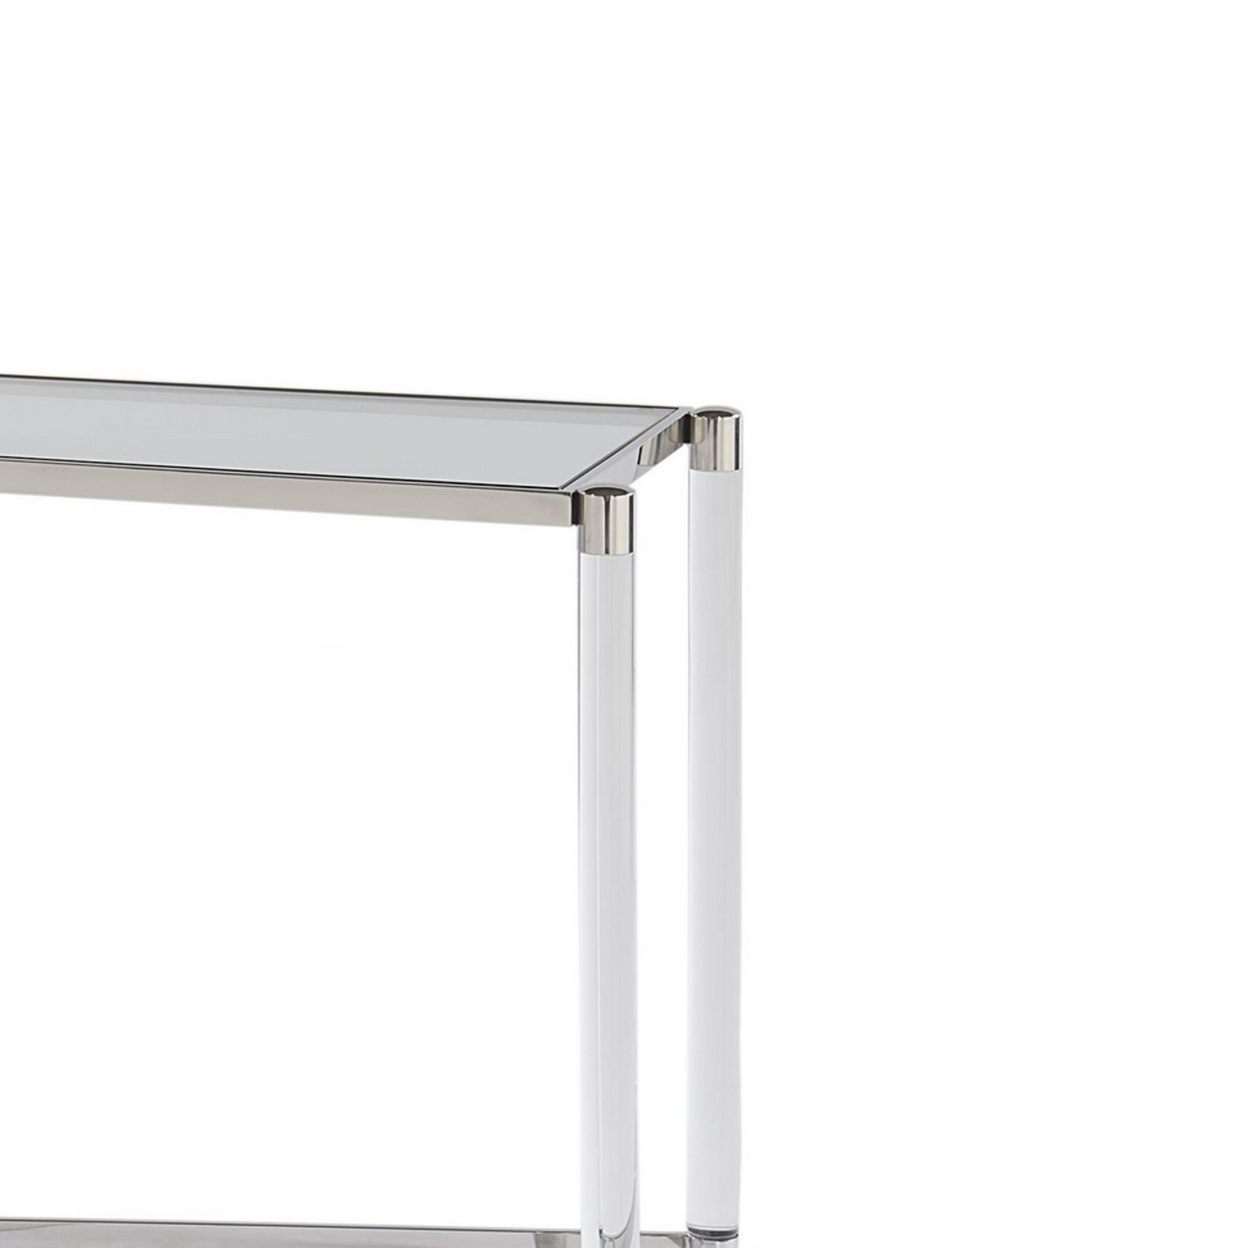 52 Inches Glass Top Console Table With Acrylic Legs, Clear And Chrome- Saltoro Sherpi